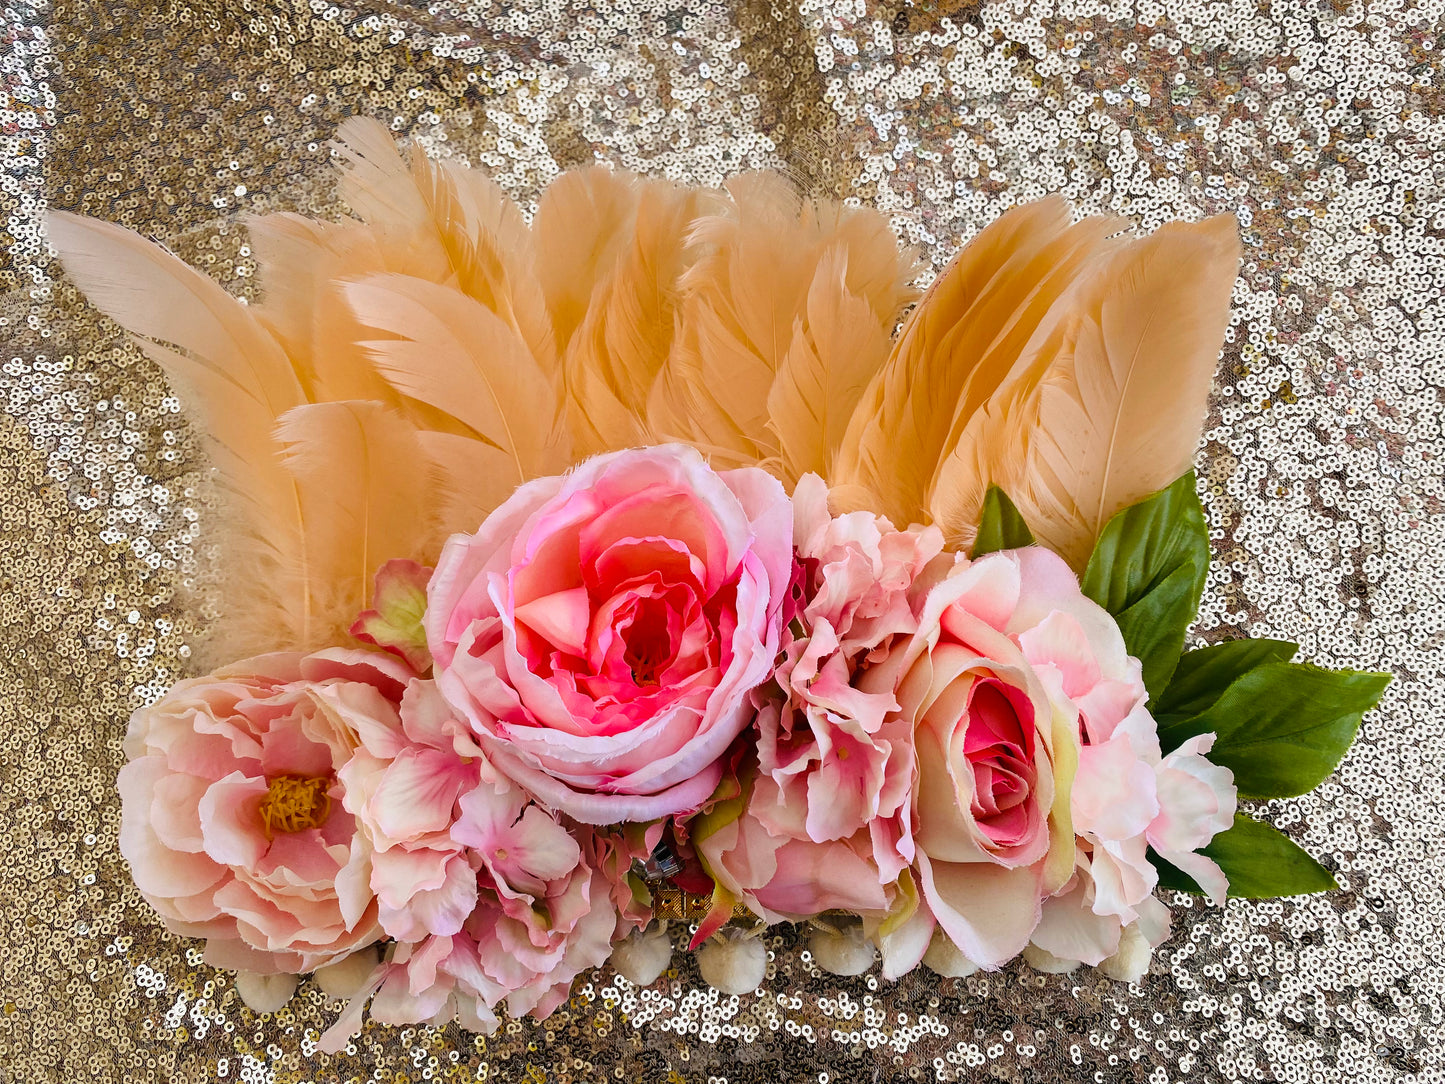 Peach deluxe with flowers headdress